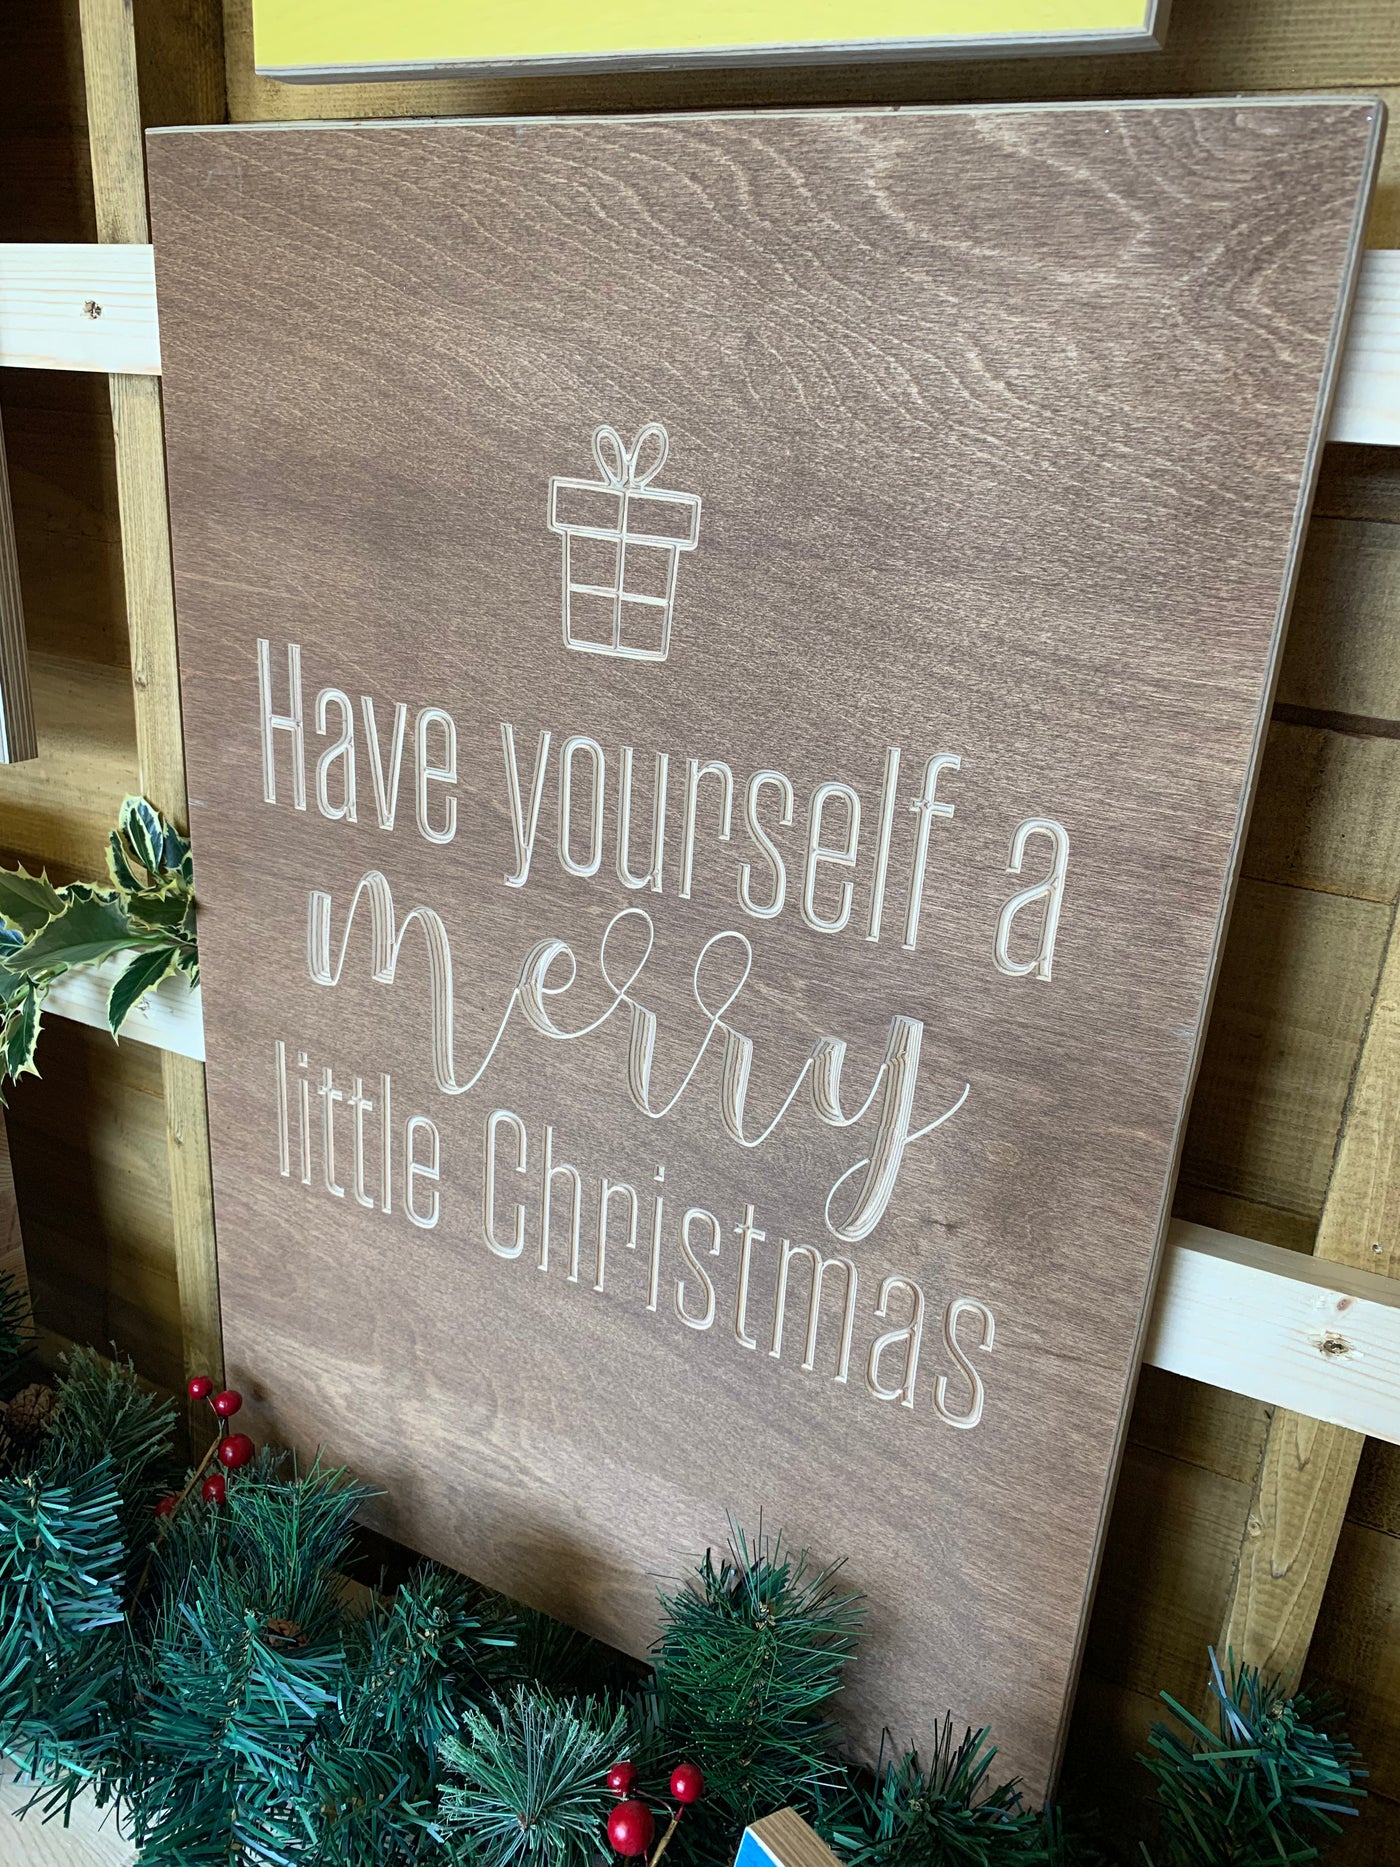 Have yourself a merry little Christmas